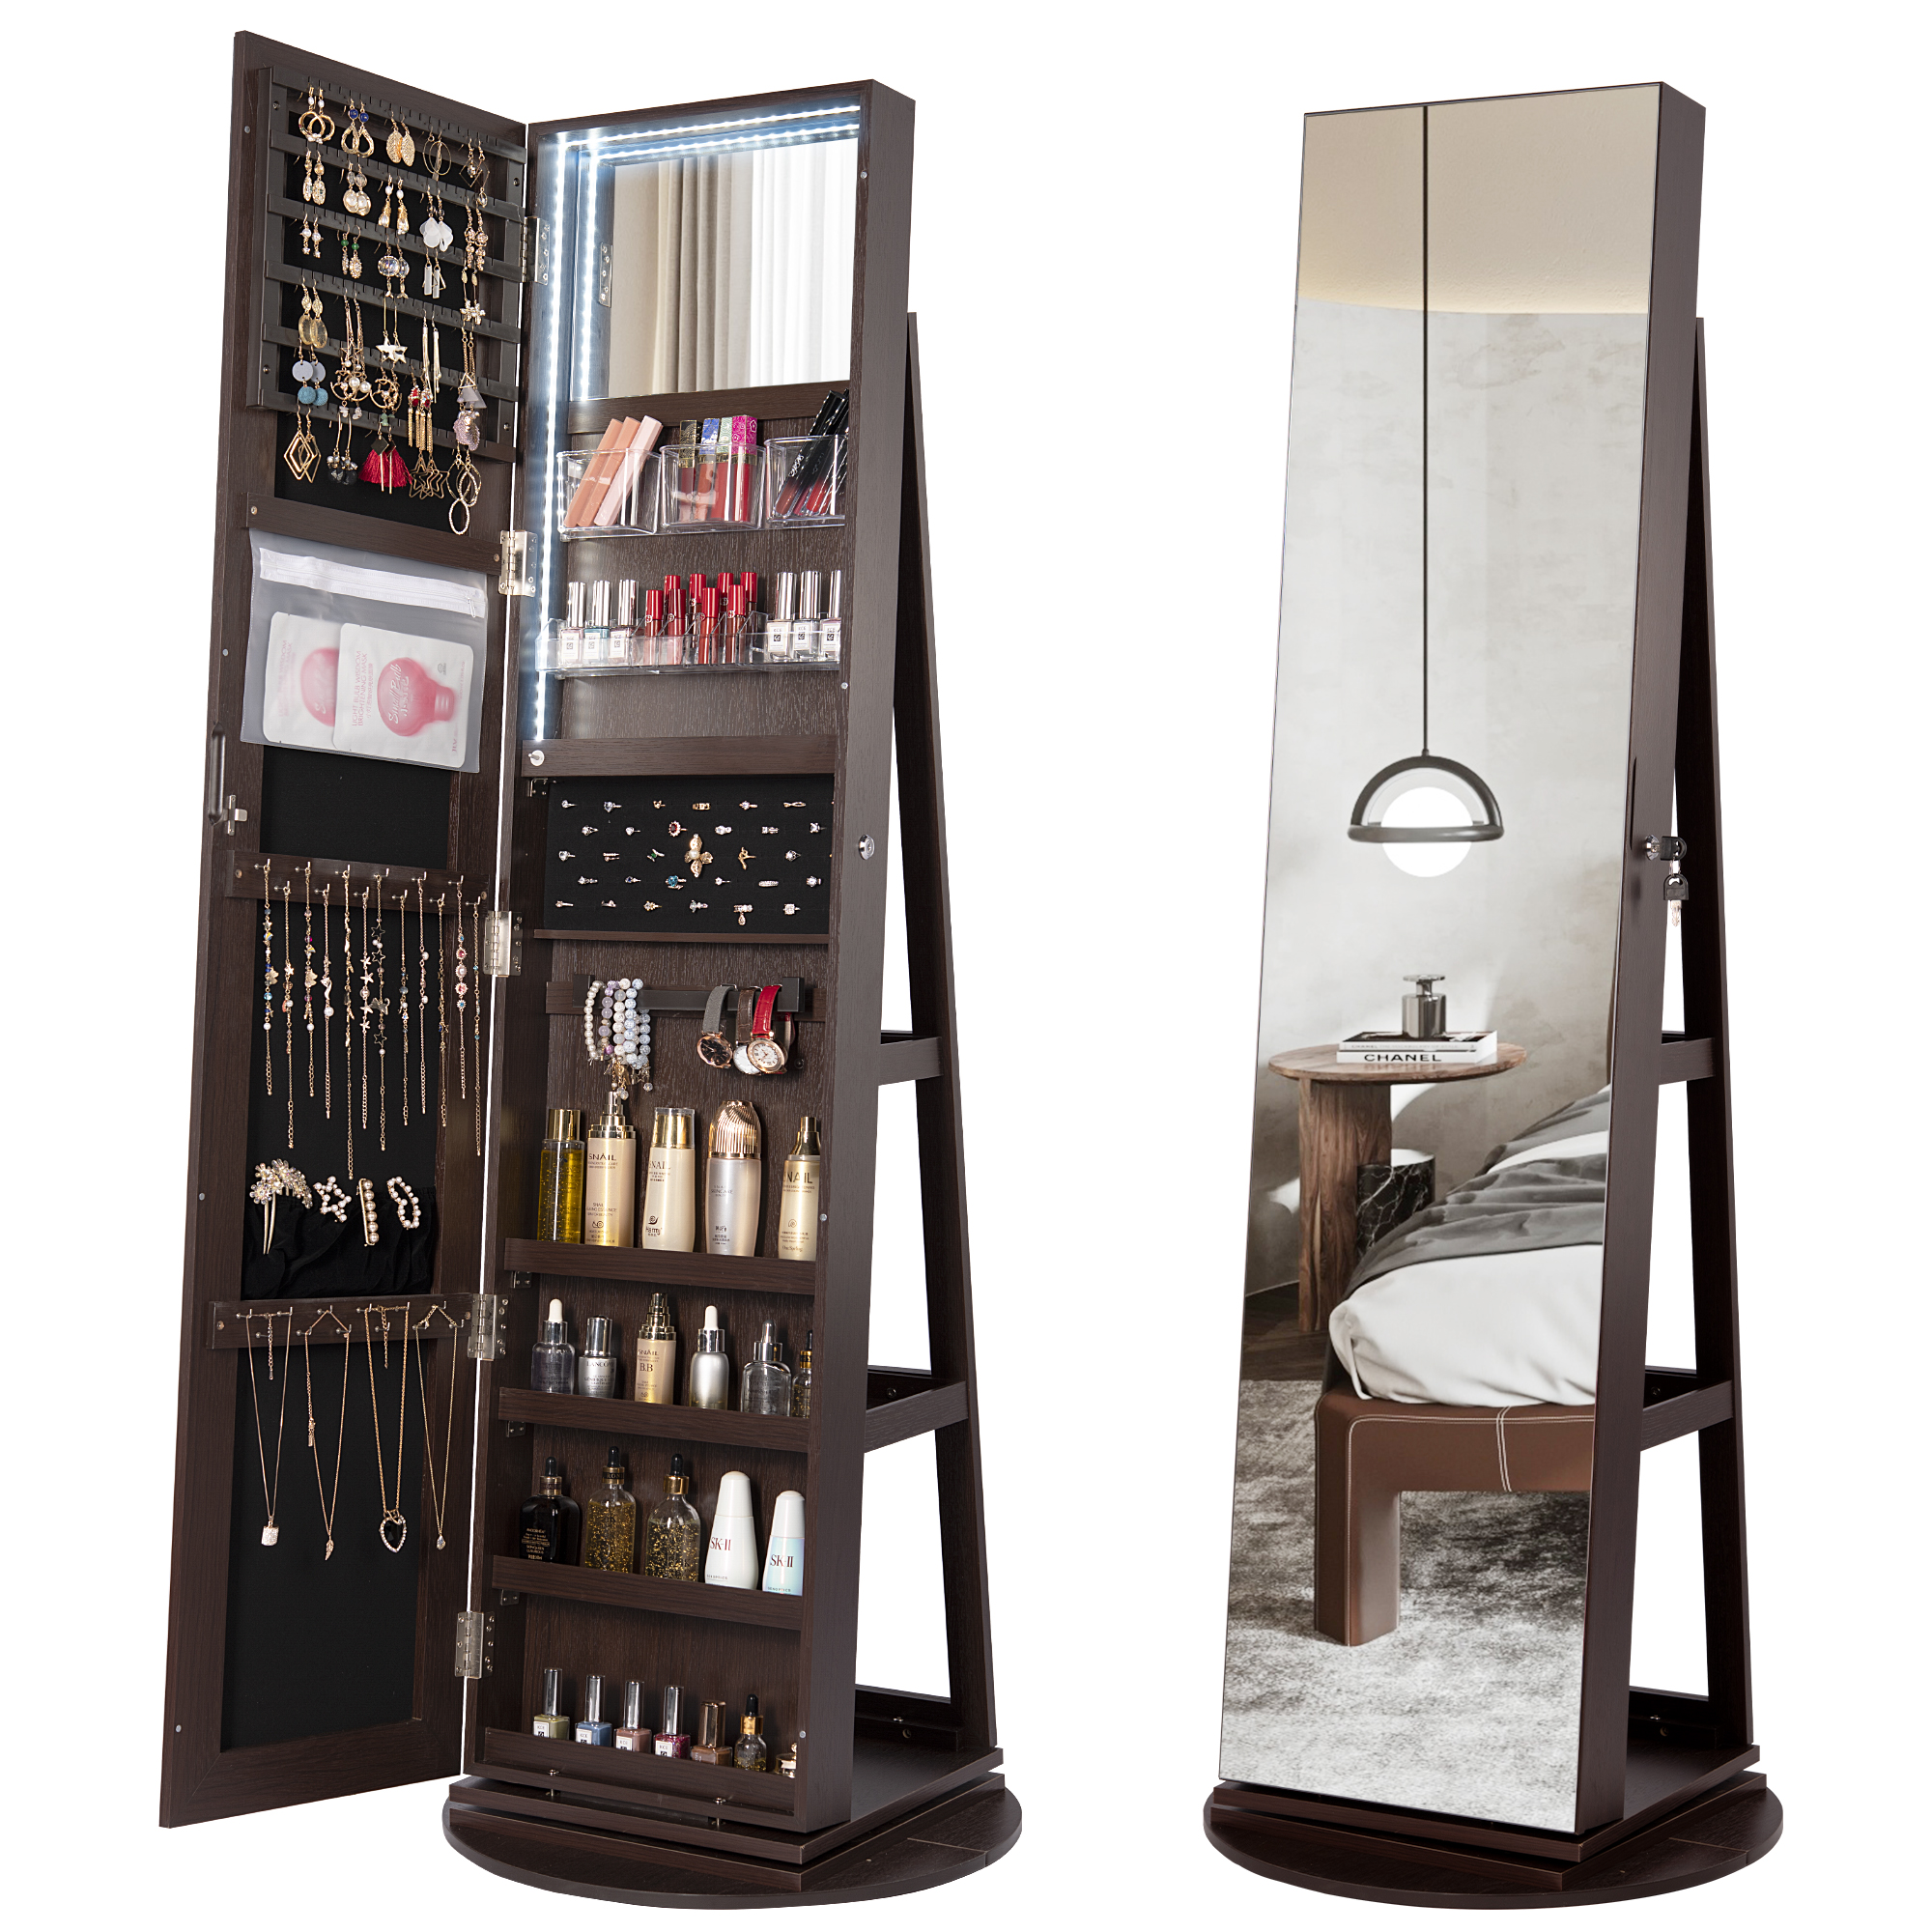 LVSOMT 360° Swivel Jewelry Cabinet with Full Length Mirror